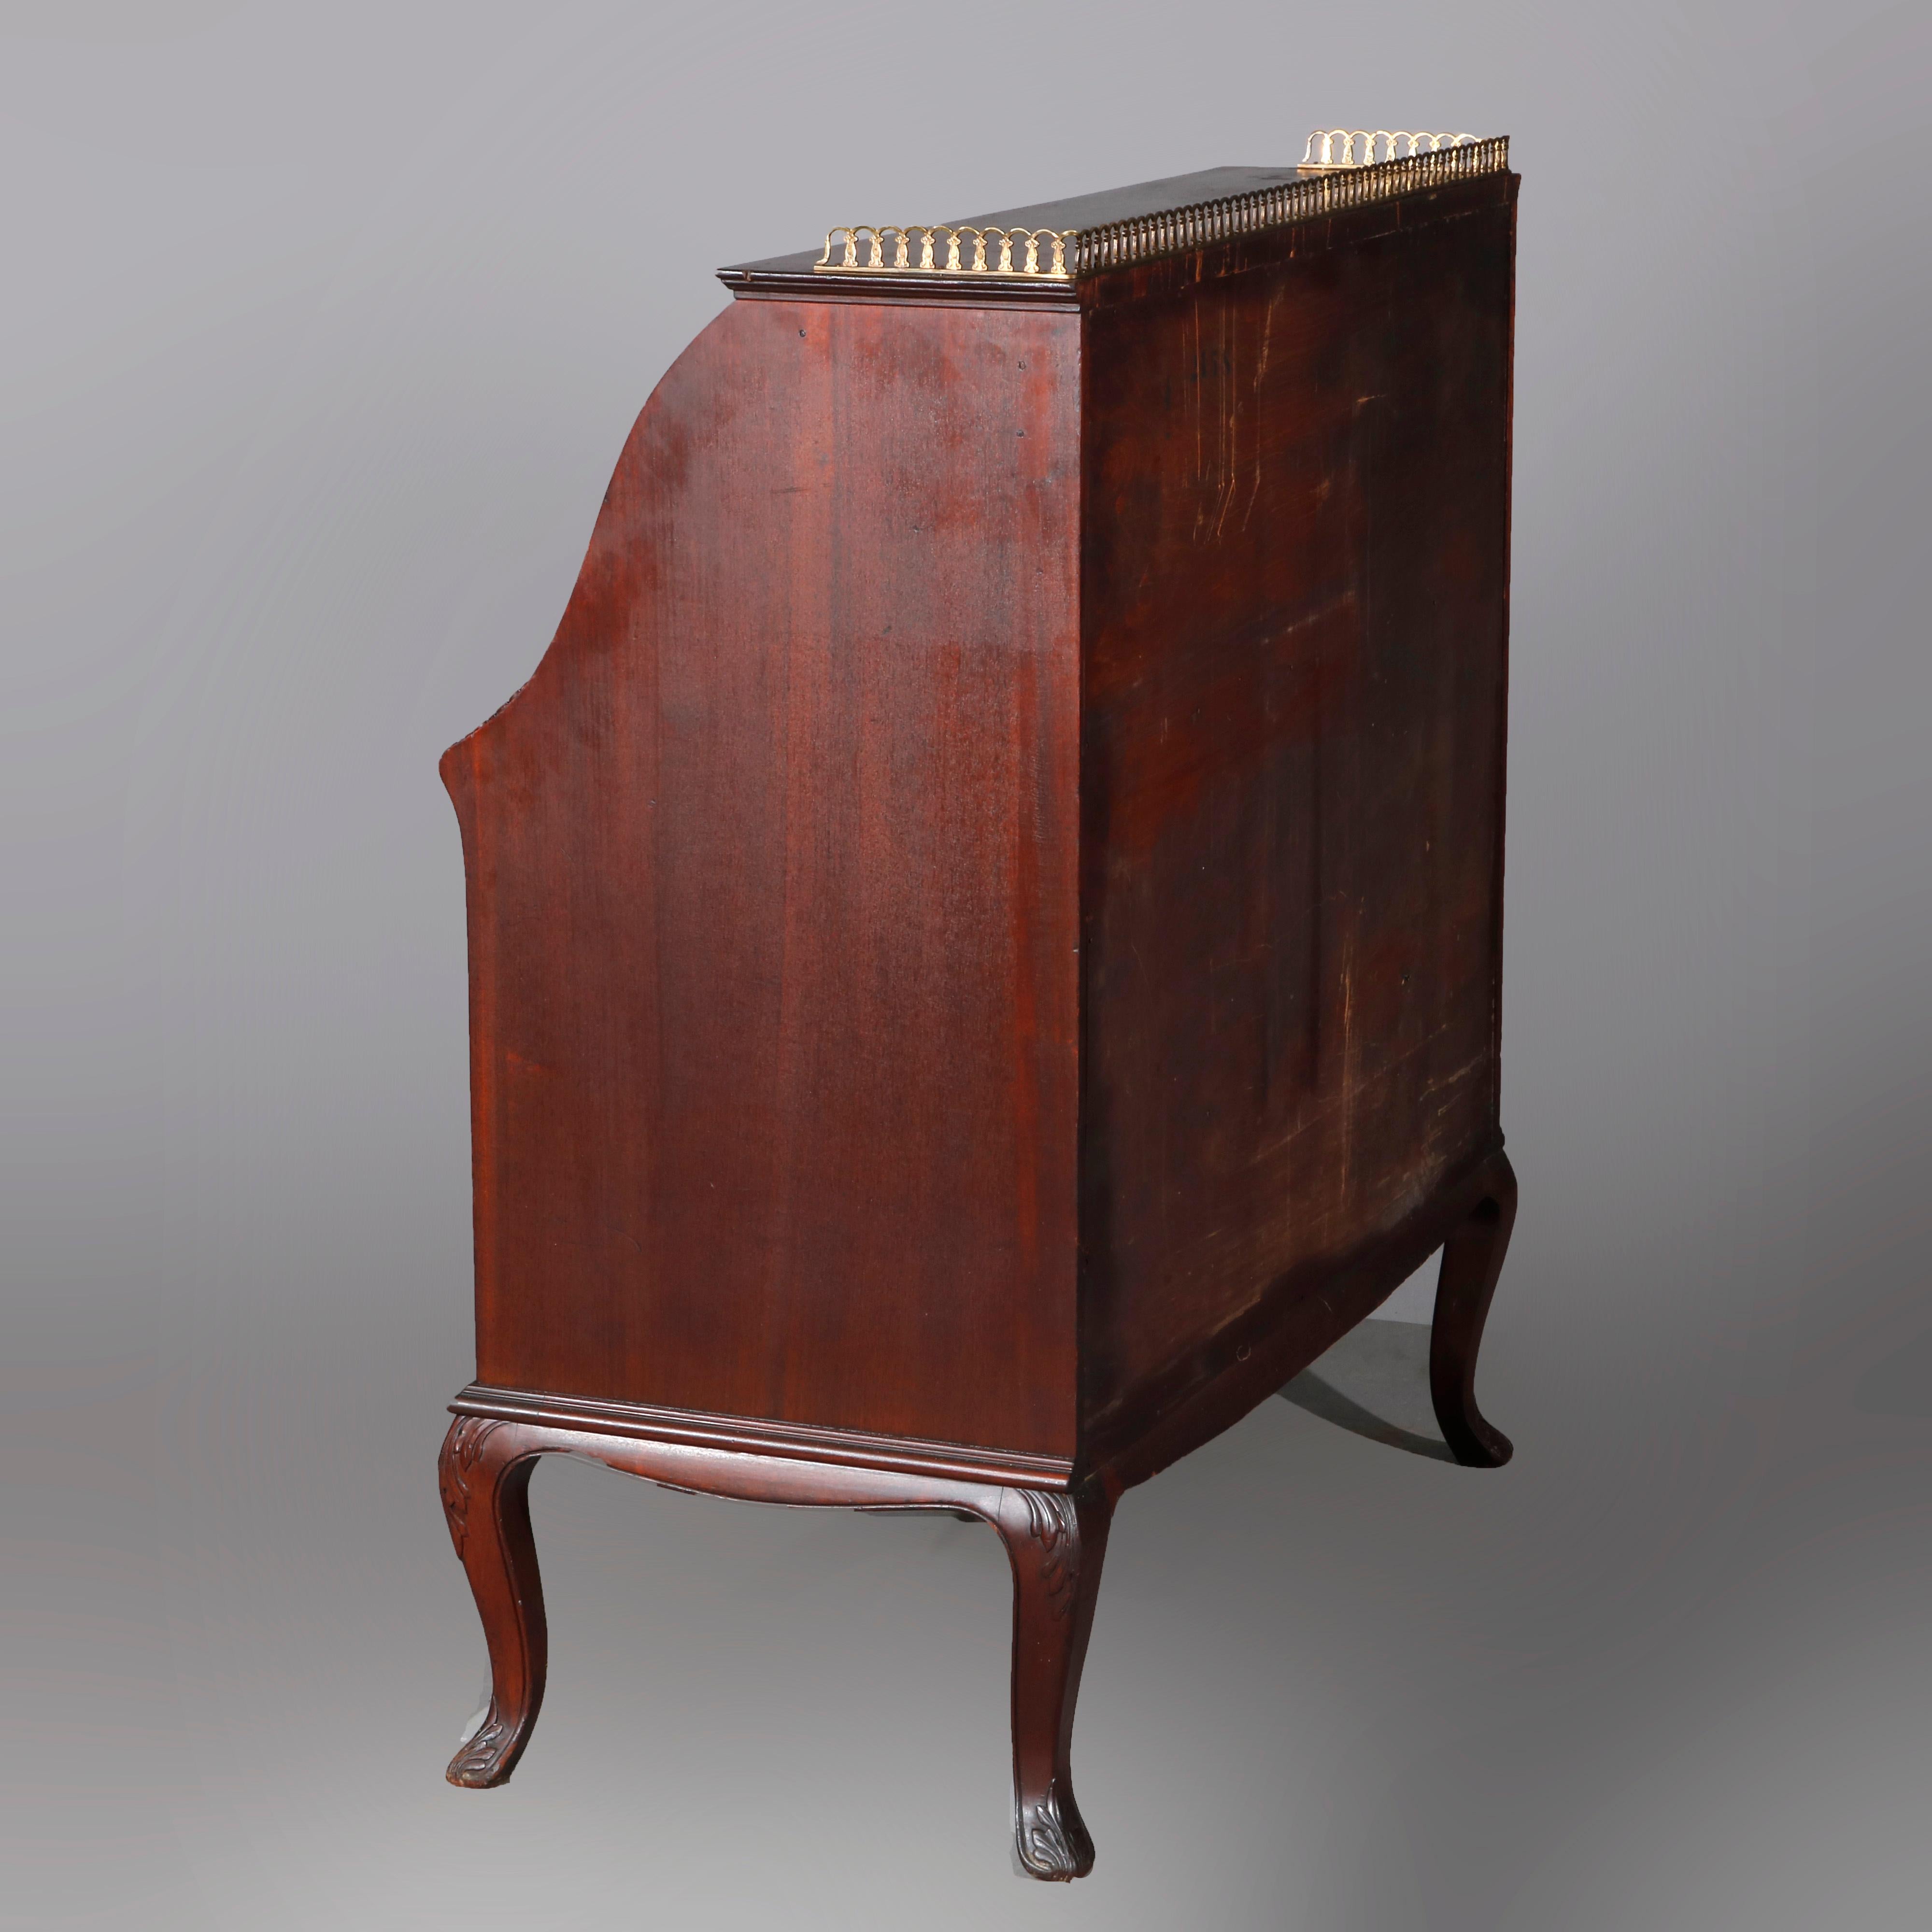 Carved French RJ Horner Style Mahogany and Satinwood Inlaid Drop Front Desk, circa 1900